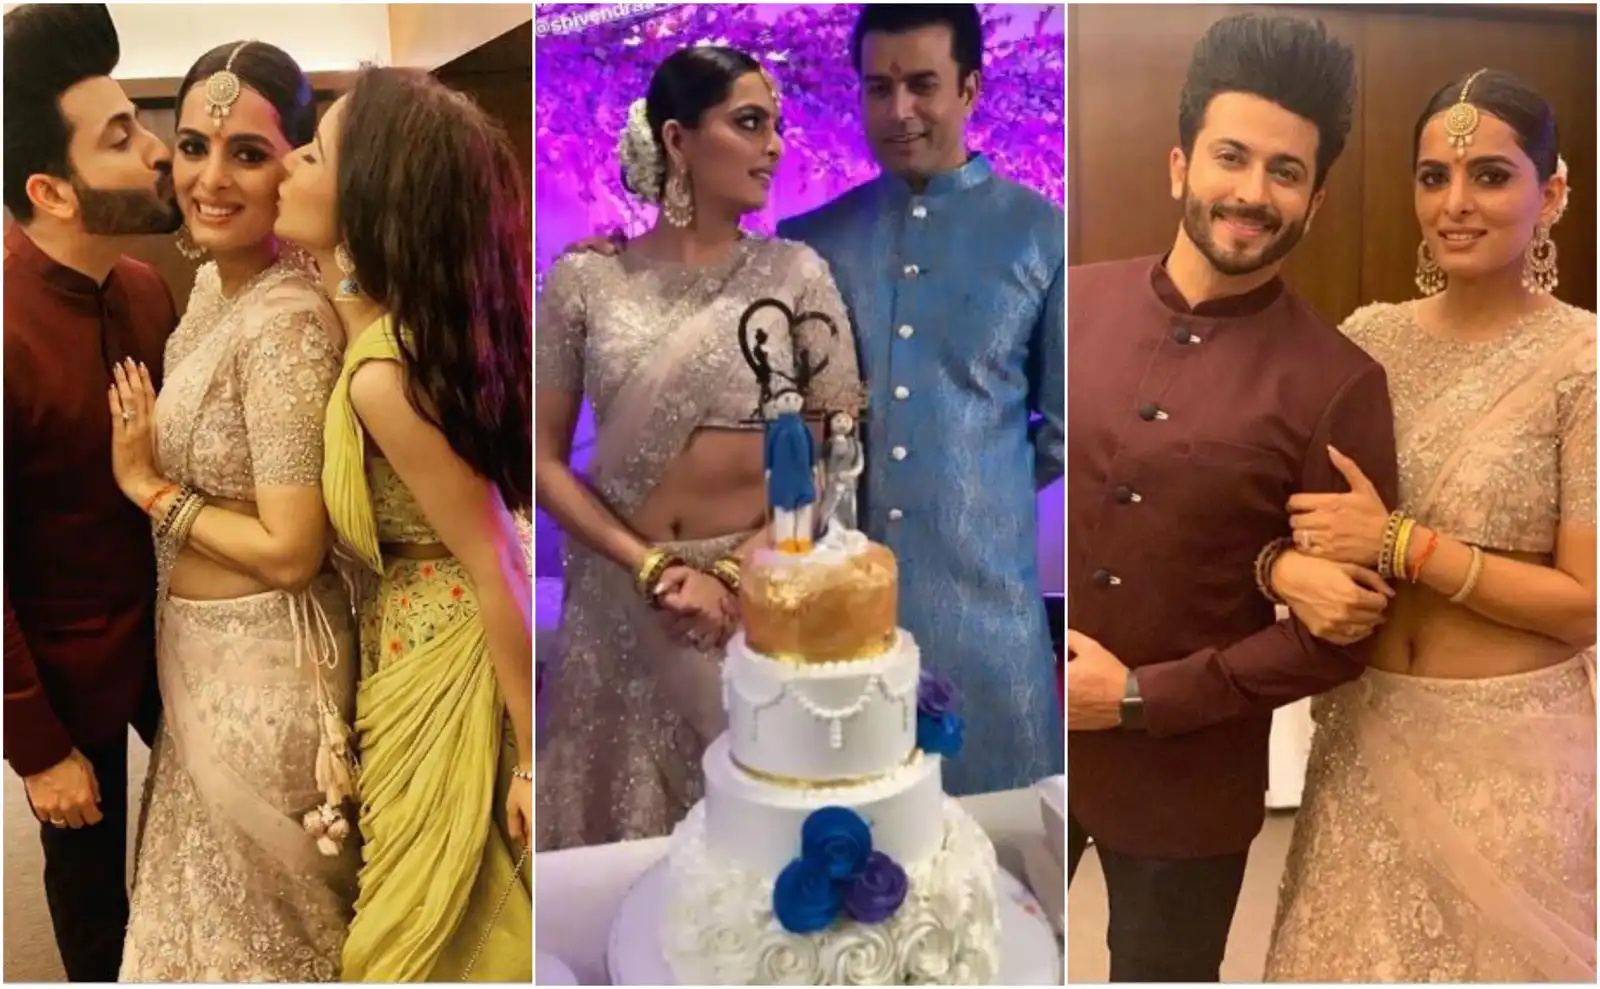 Kundali Bhagya Actress Ruhi Chaturvedi Getting Engaged To Her Boyfriend Of 13 Years Will Make You Believe In Soulmates Again